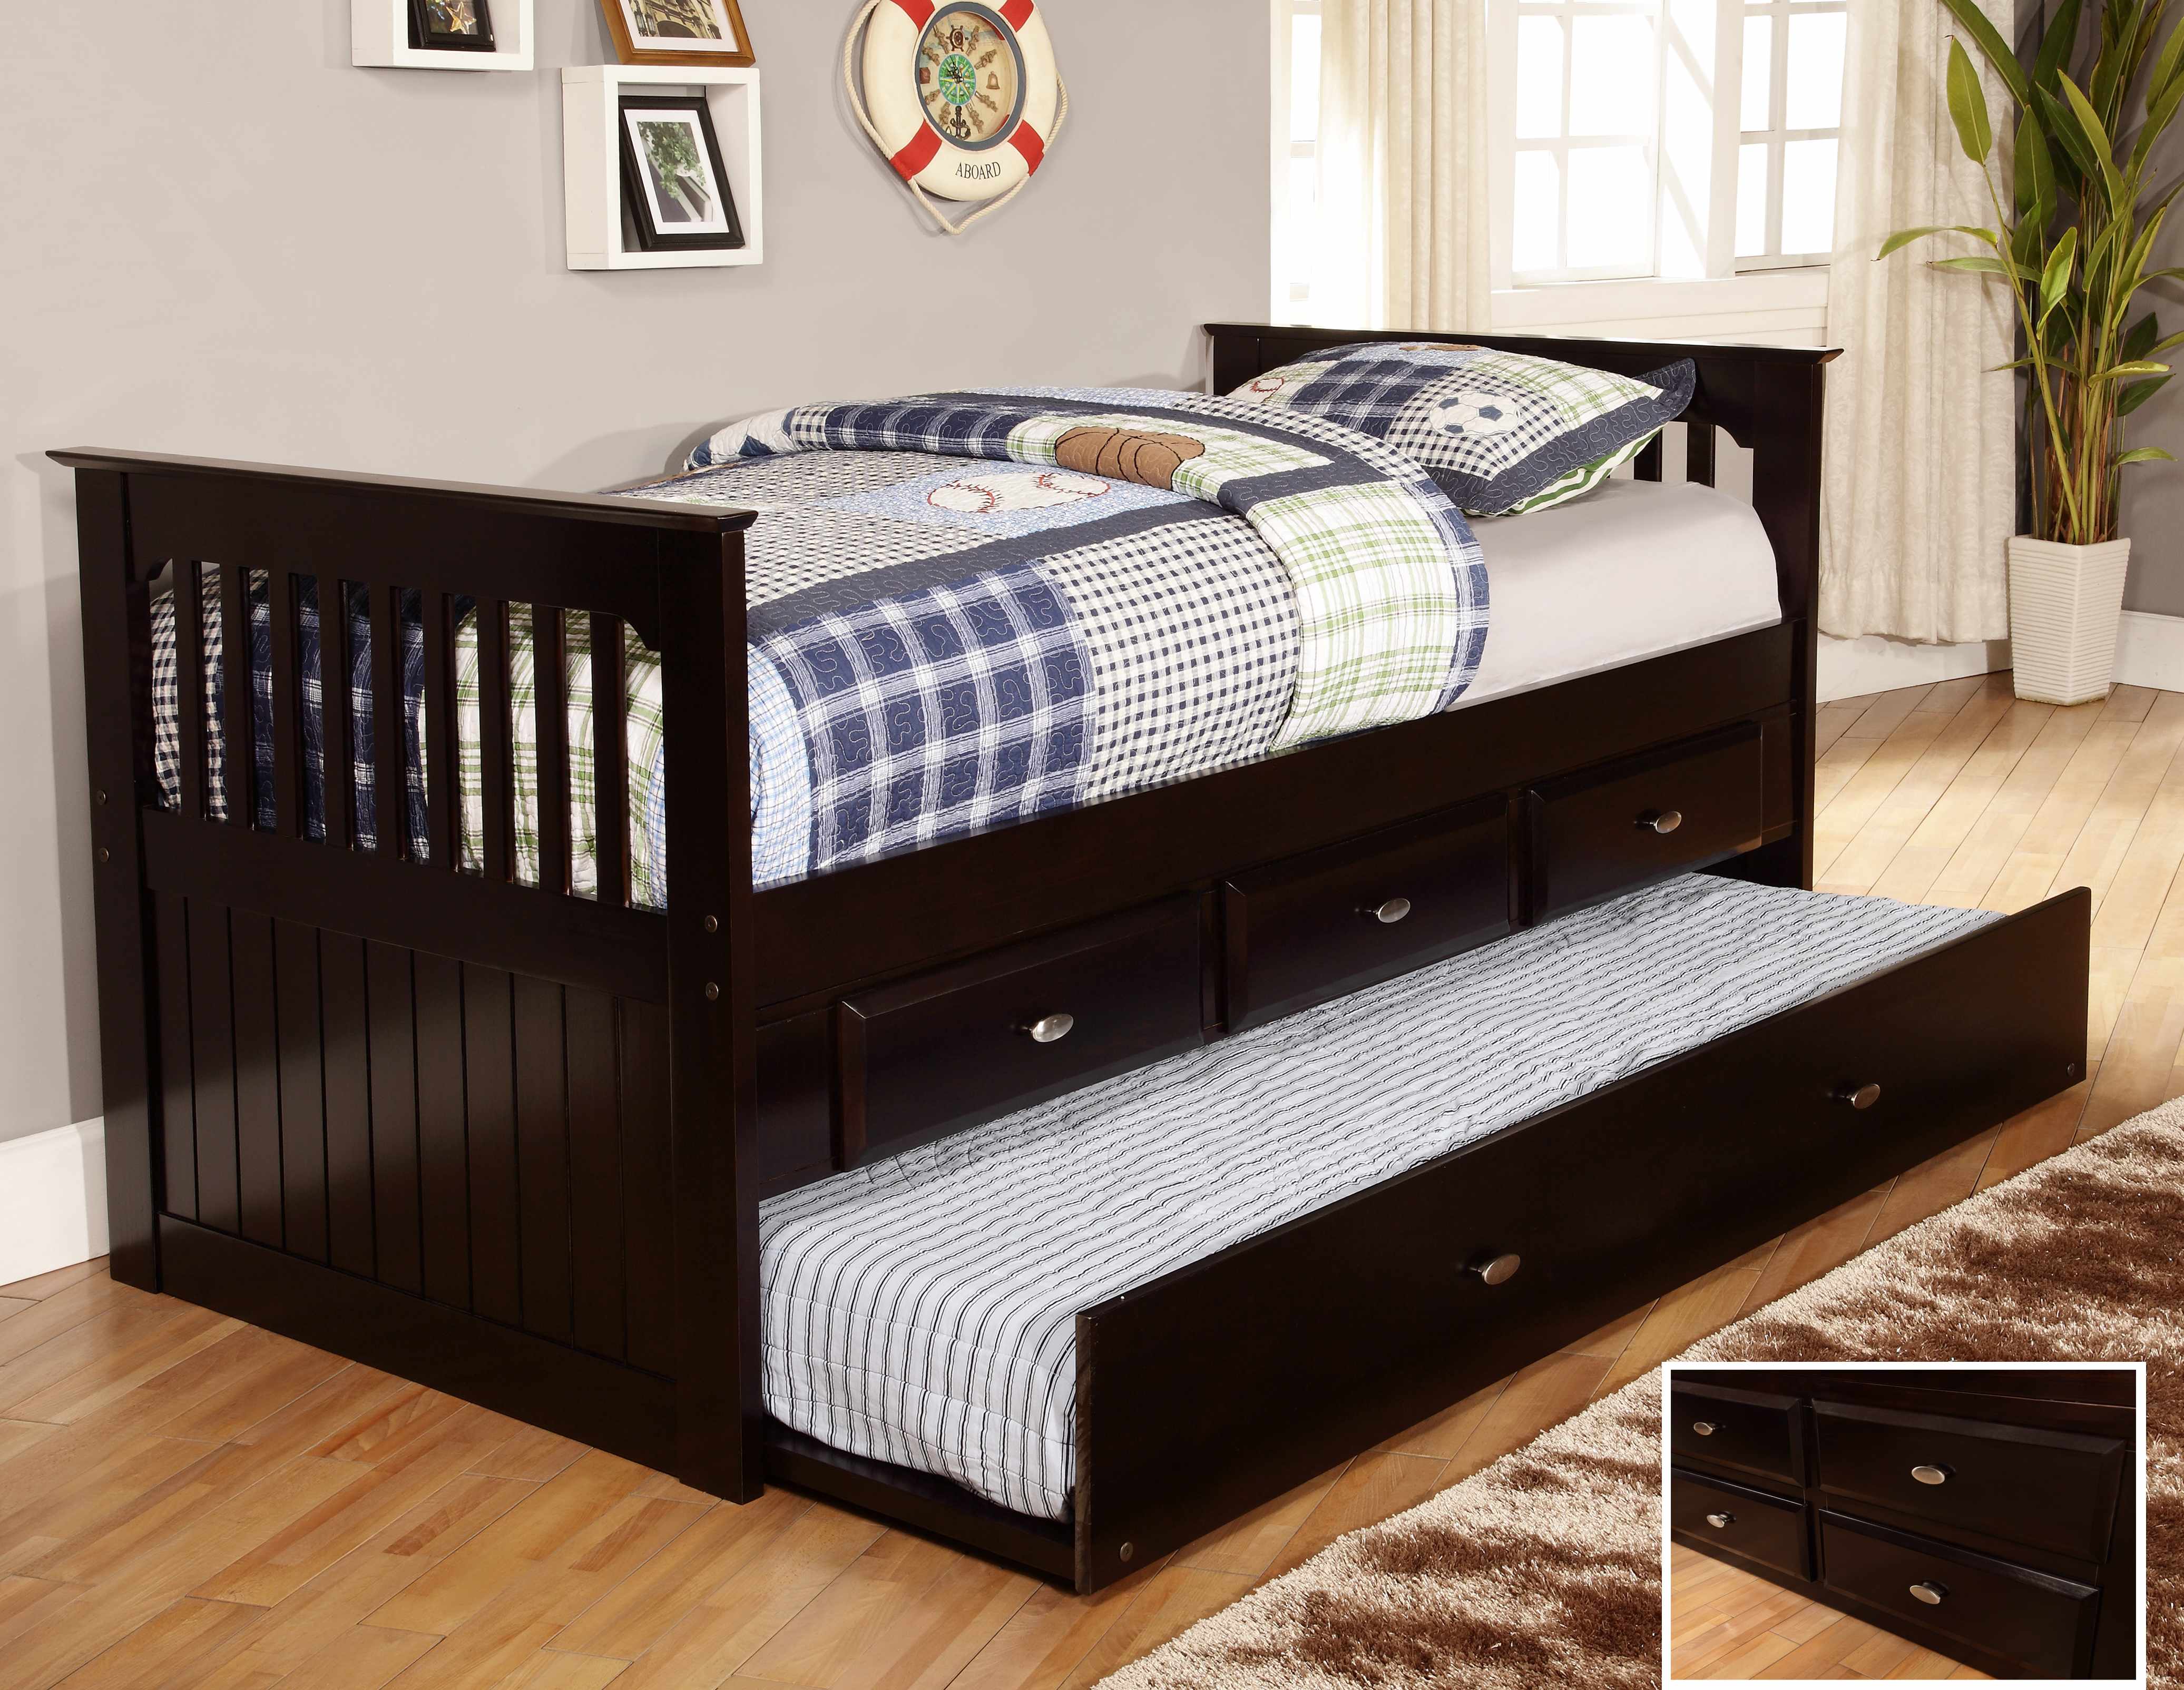 Sofa Bed for Bedroom Living Room,Walnut Captain's Bed Twin Daybed with Trundle Bed and Storage Drawers Wood Twin Size Bed Daybed Frame